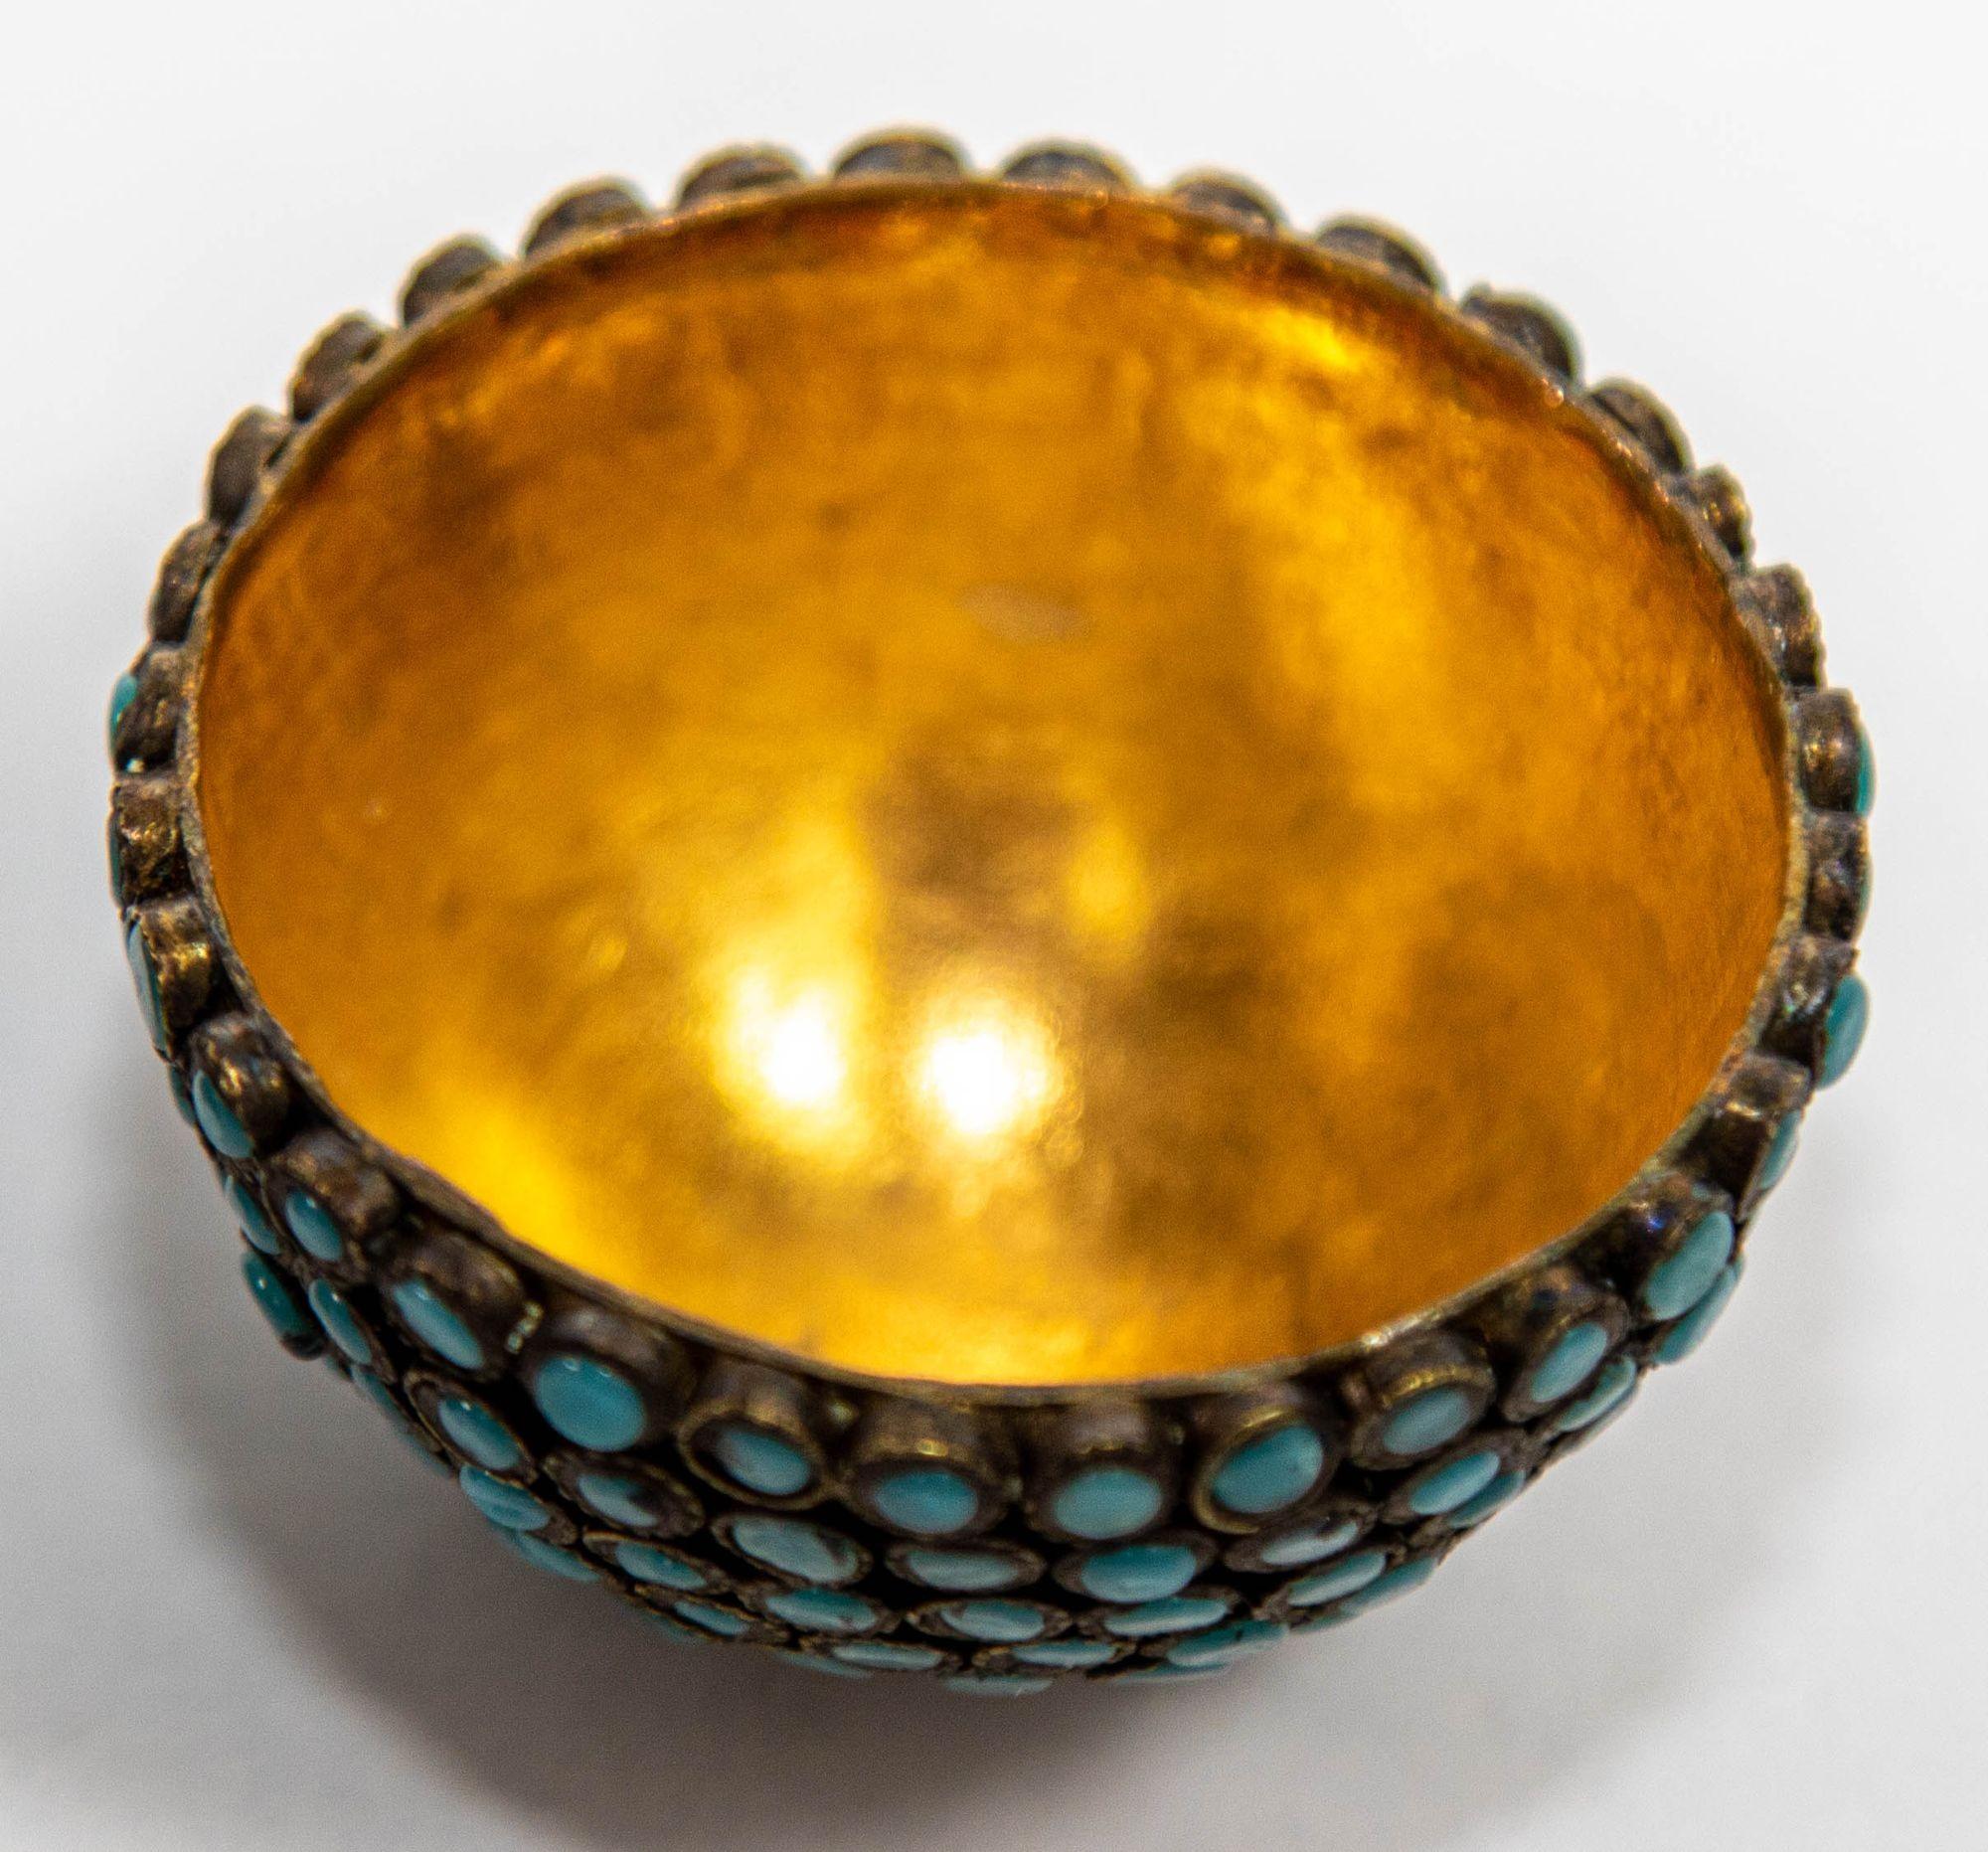 Antique Tibetan Egg Shaped Box with Turquoise Blue Stone Inlay In Good Condition For Sale In North Hollywood, CA